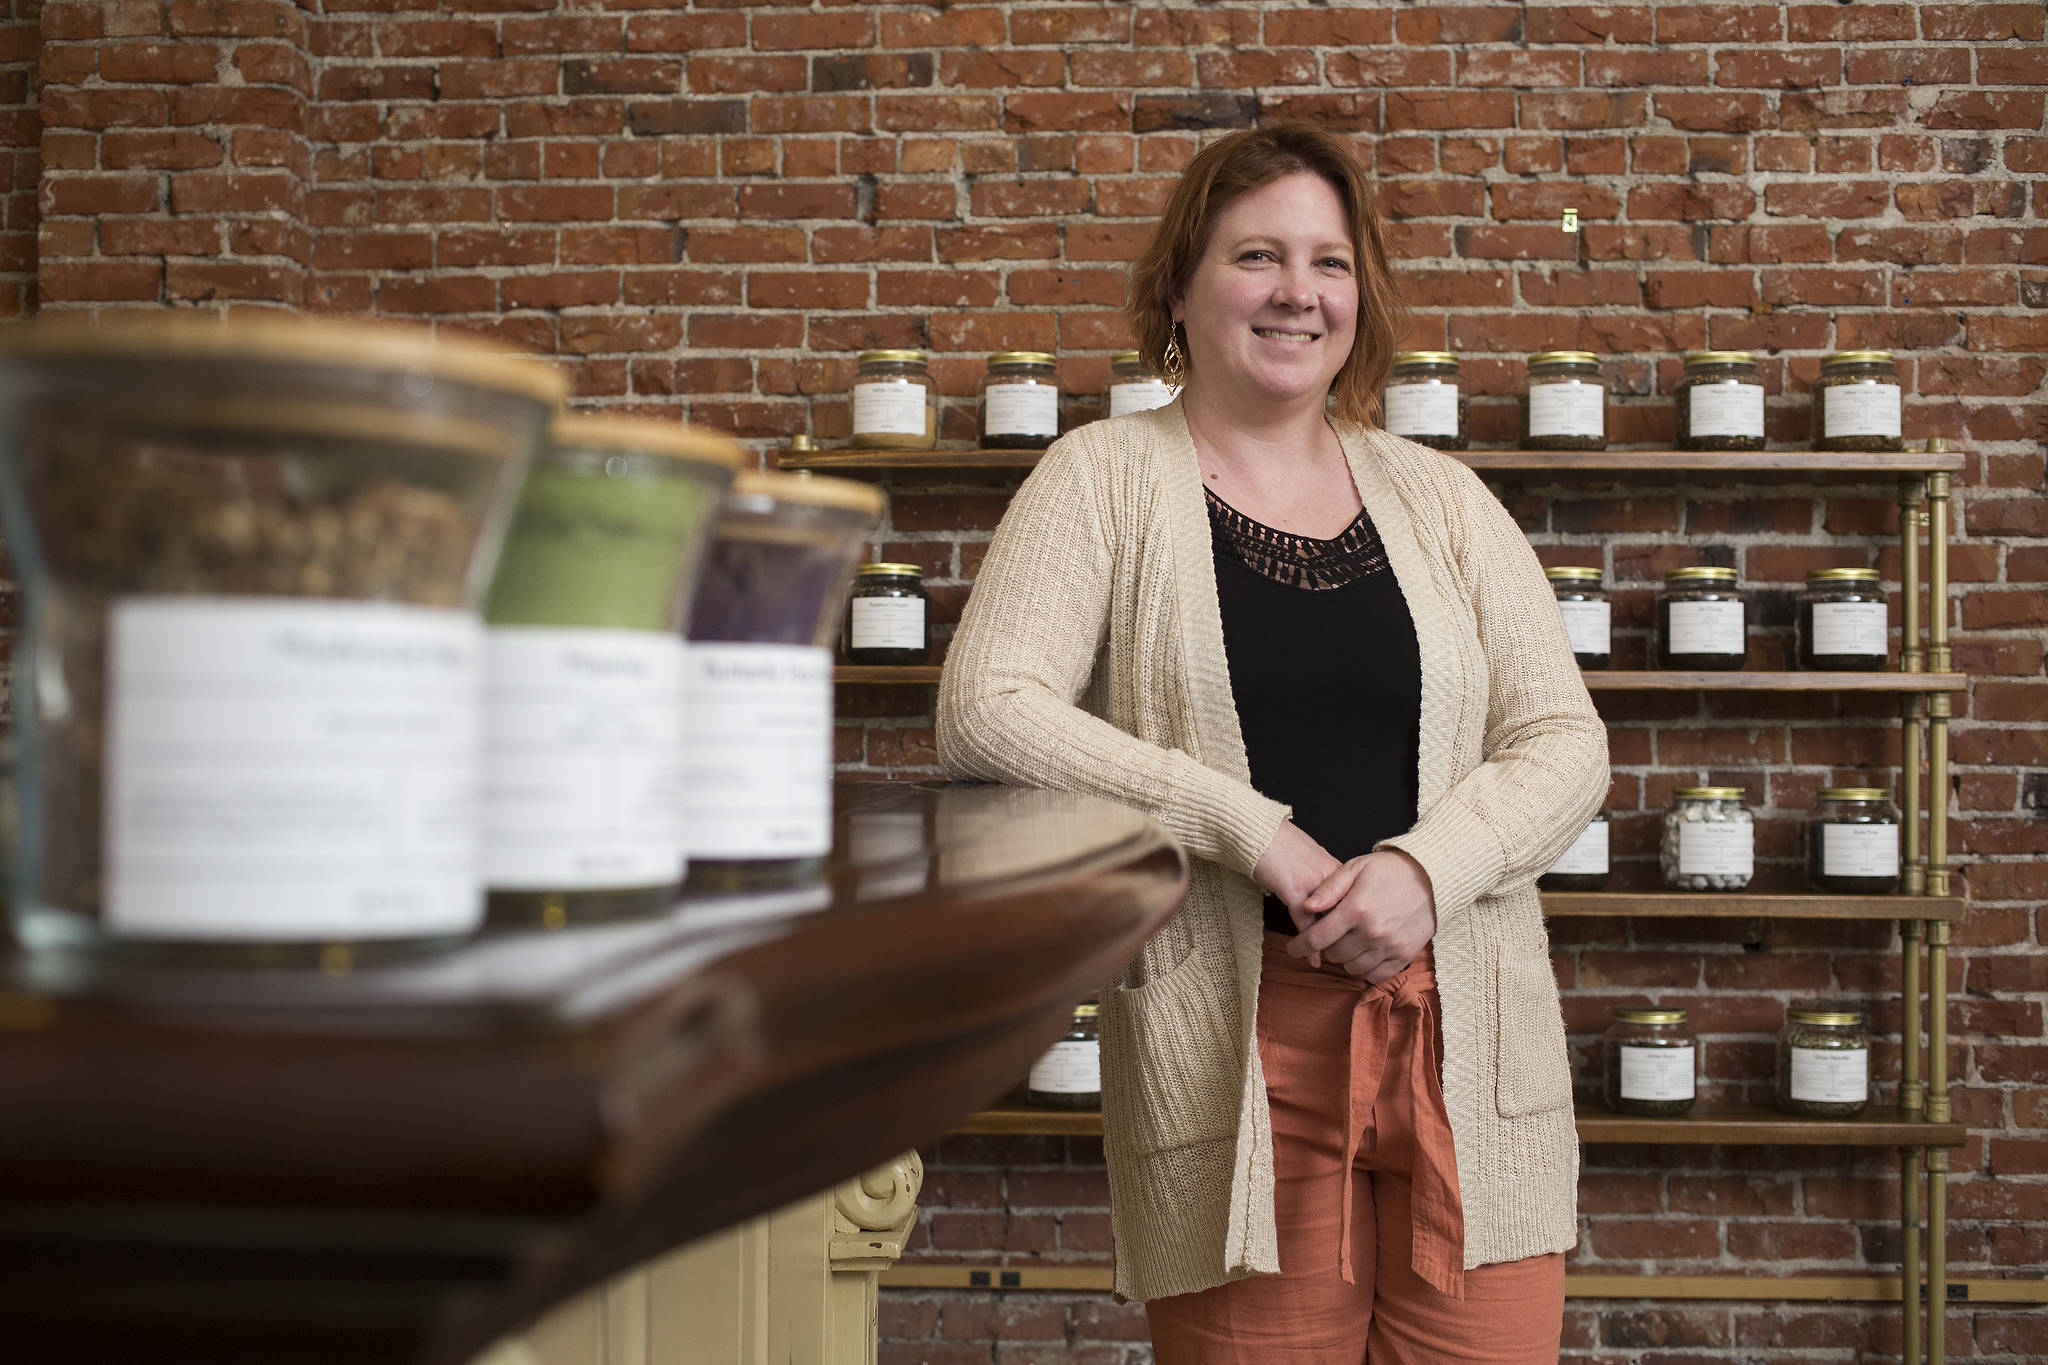 Chai Cupboard sells loose tea and spices in downtown Everett, owned by Jeni and Tim Ellis. (Andy Bronson / The Herald)